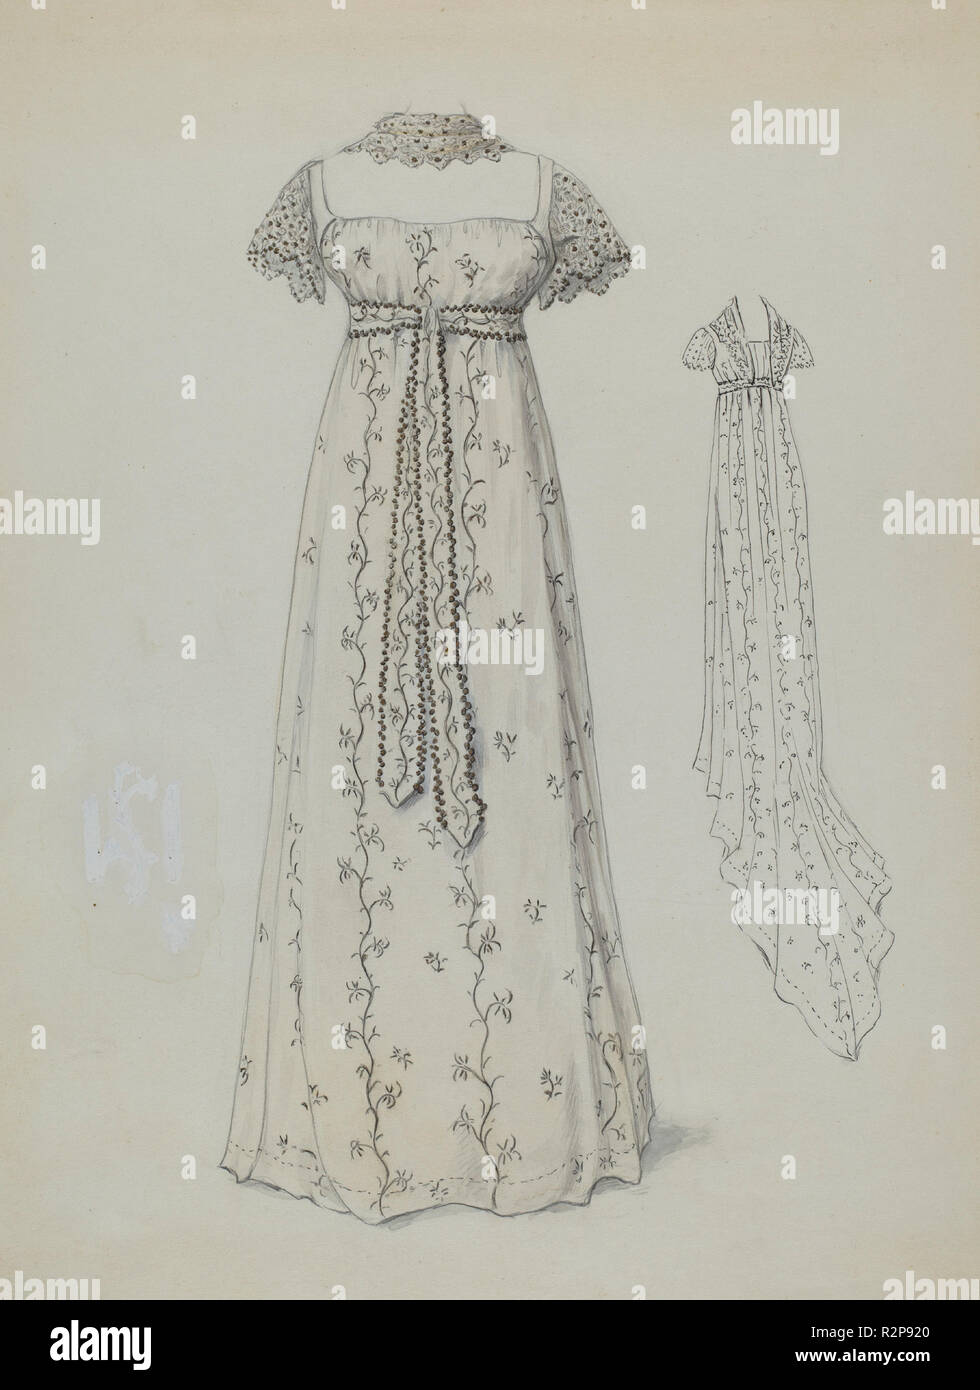 Dress. Dated: c. 1936. Dimensions: overall: 30.6 x 23.2 cm (12 1/16 x 9 1/8 in.). Medium: watercolor, graphite, and pen and ink on paper. Museum: National Gallery of Art, Washington DC. Author: Jessie M. Benge. Stock Photo